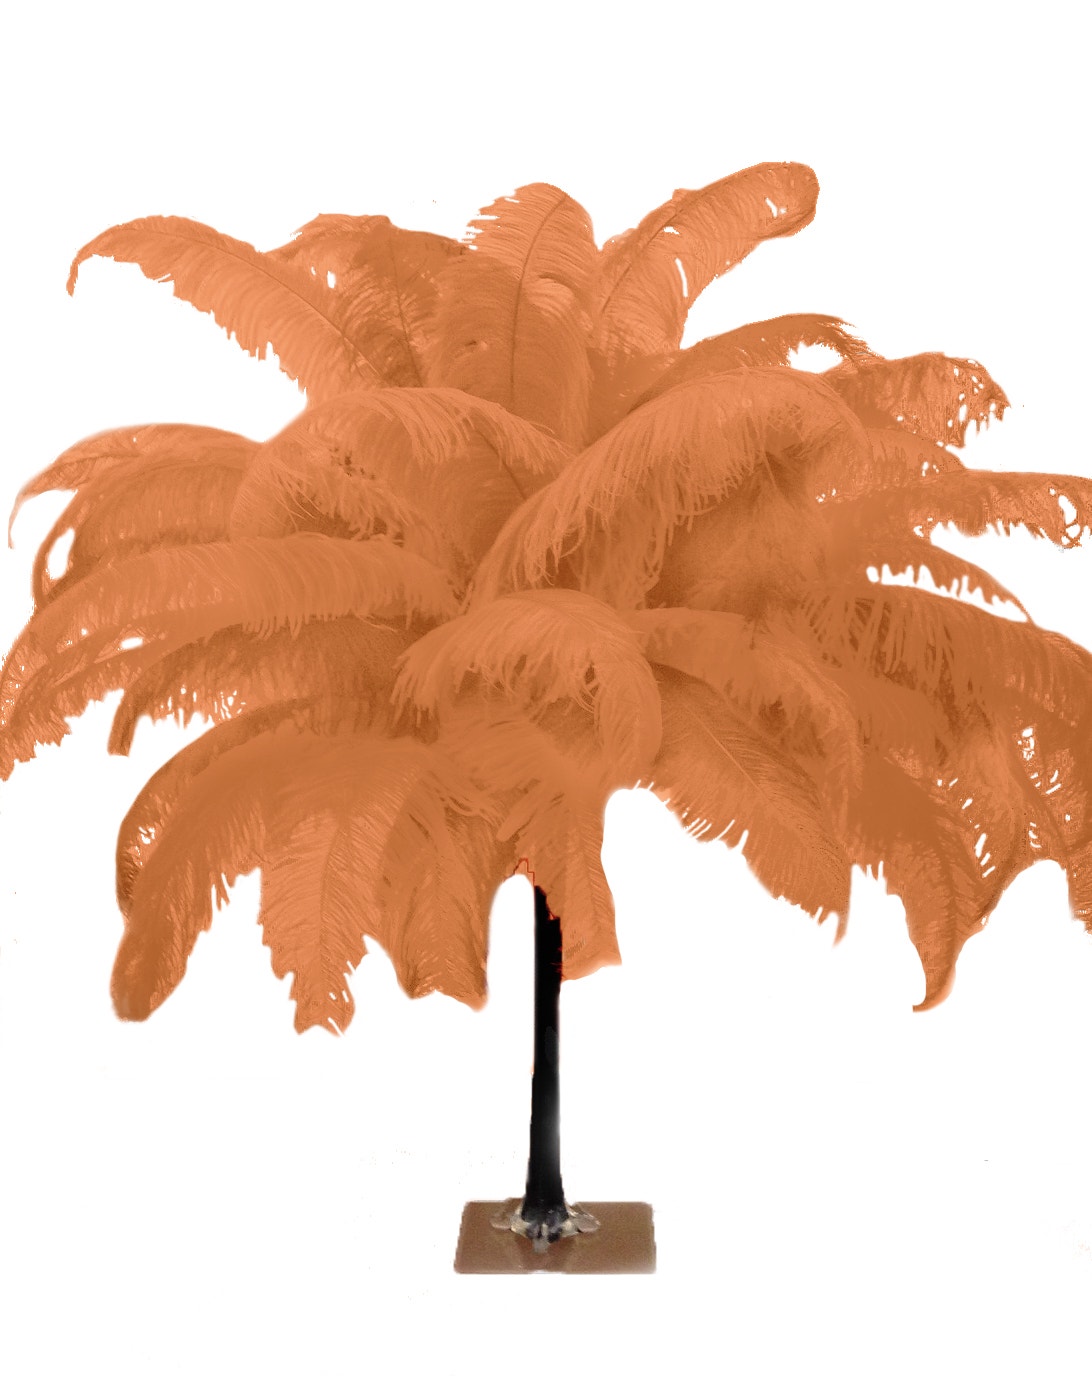 Large Ostrich Feathers - 18-24" Spads - Cinnamon